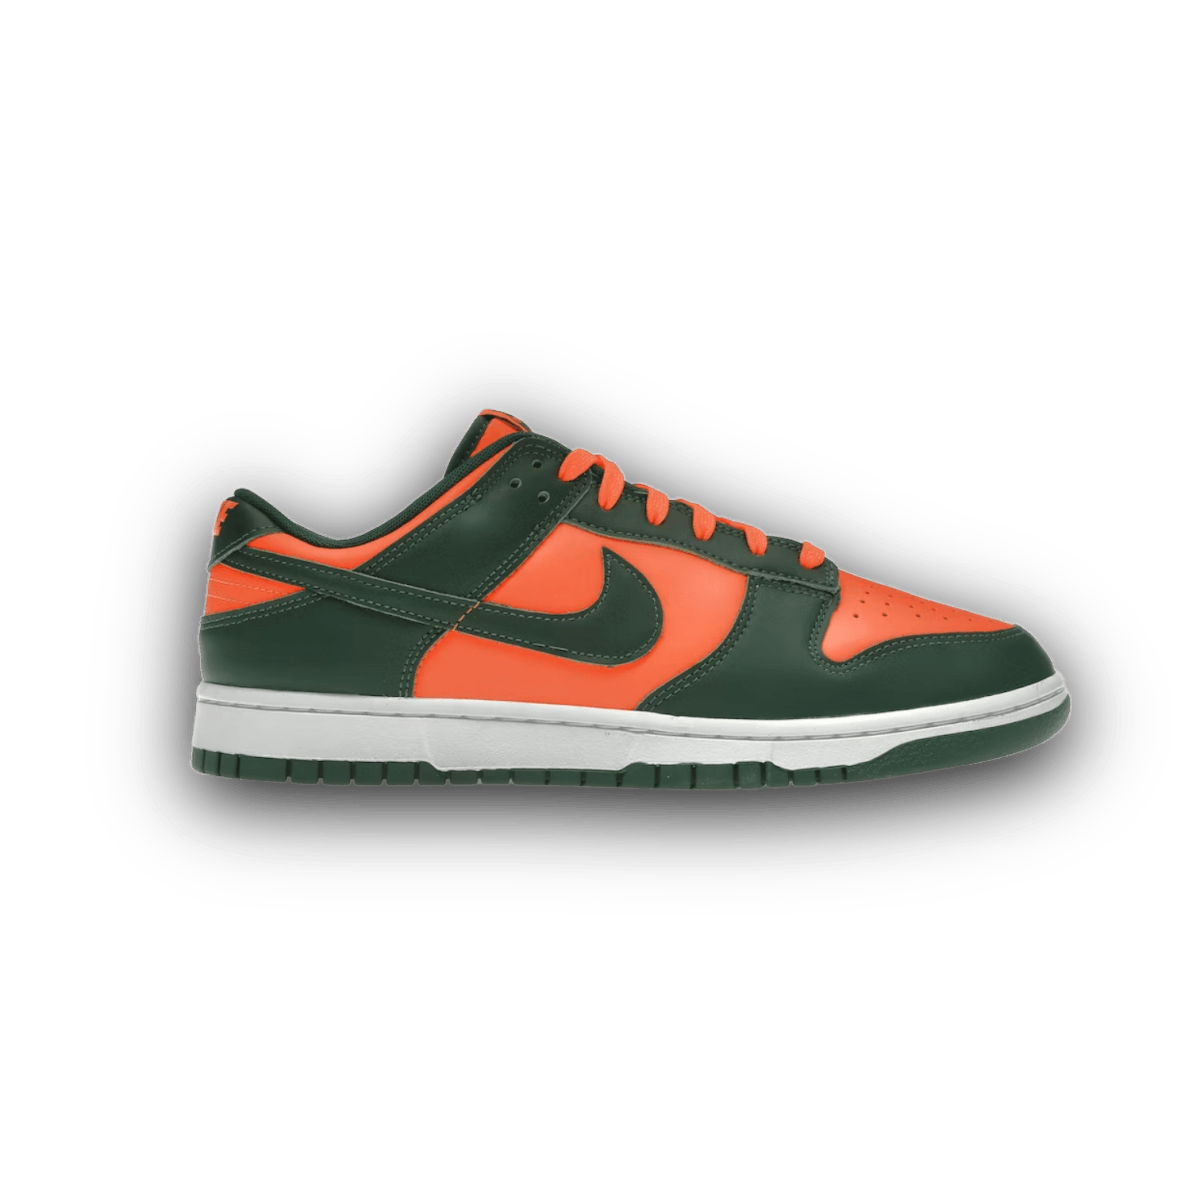 Dunk Low Retro Miami Hurricanes - Low Sneaker - Dunks - Jawns on Fire